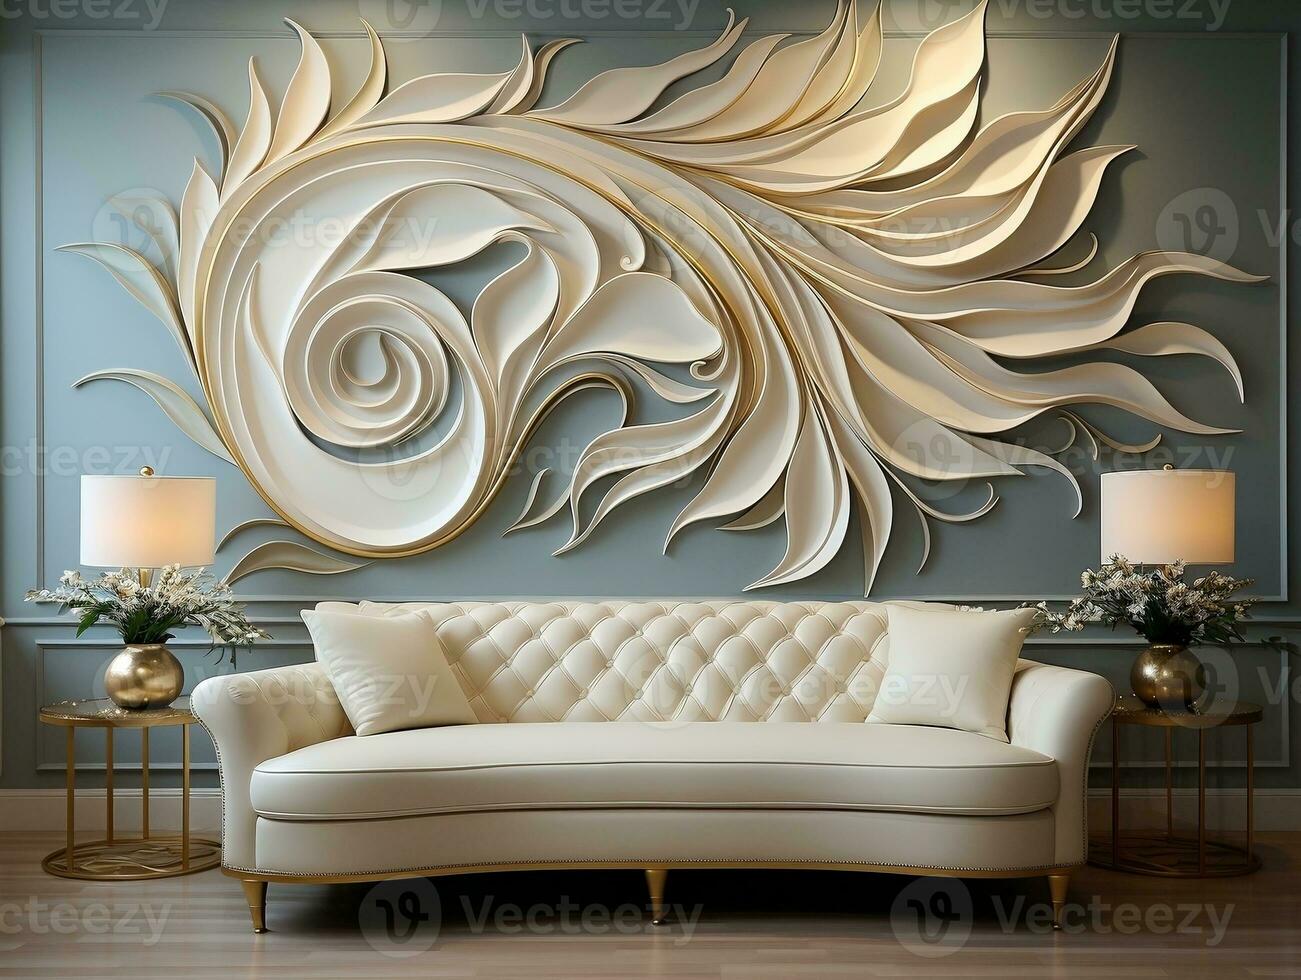 optical illusion 3d wall design | 3d wall painting | 3d wall decoration  effect | interior design | optical illusion 3d wall design | 3d wall  painting | 3d wall decoration effect | interior design | By Alertness 110 |  Facebook